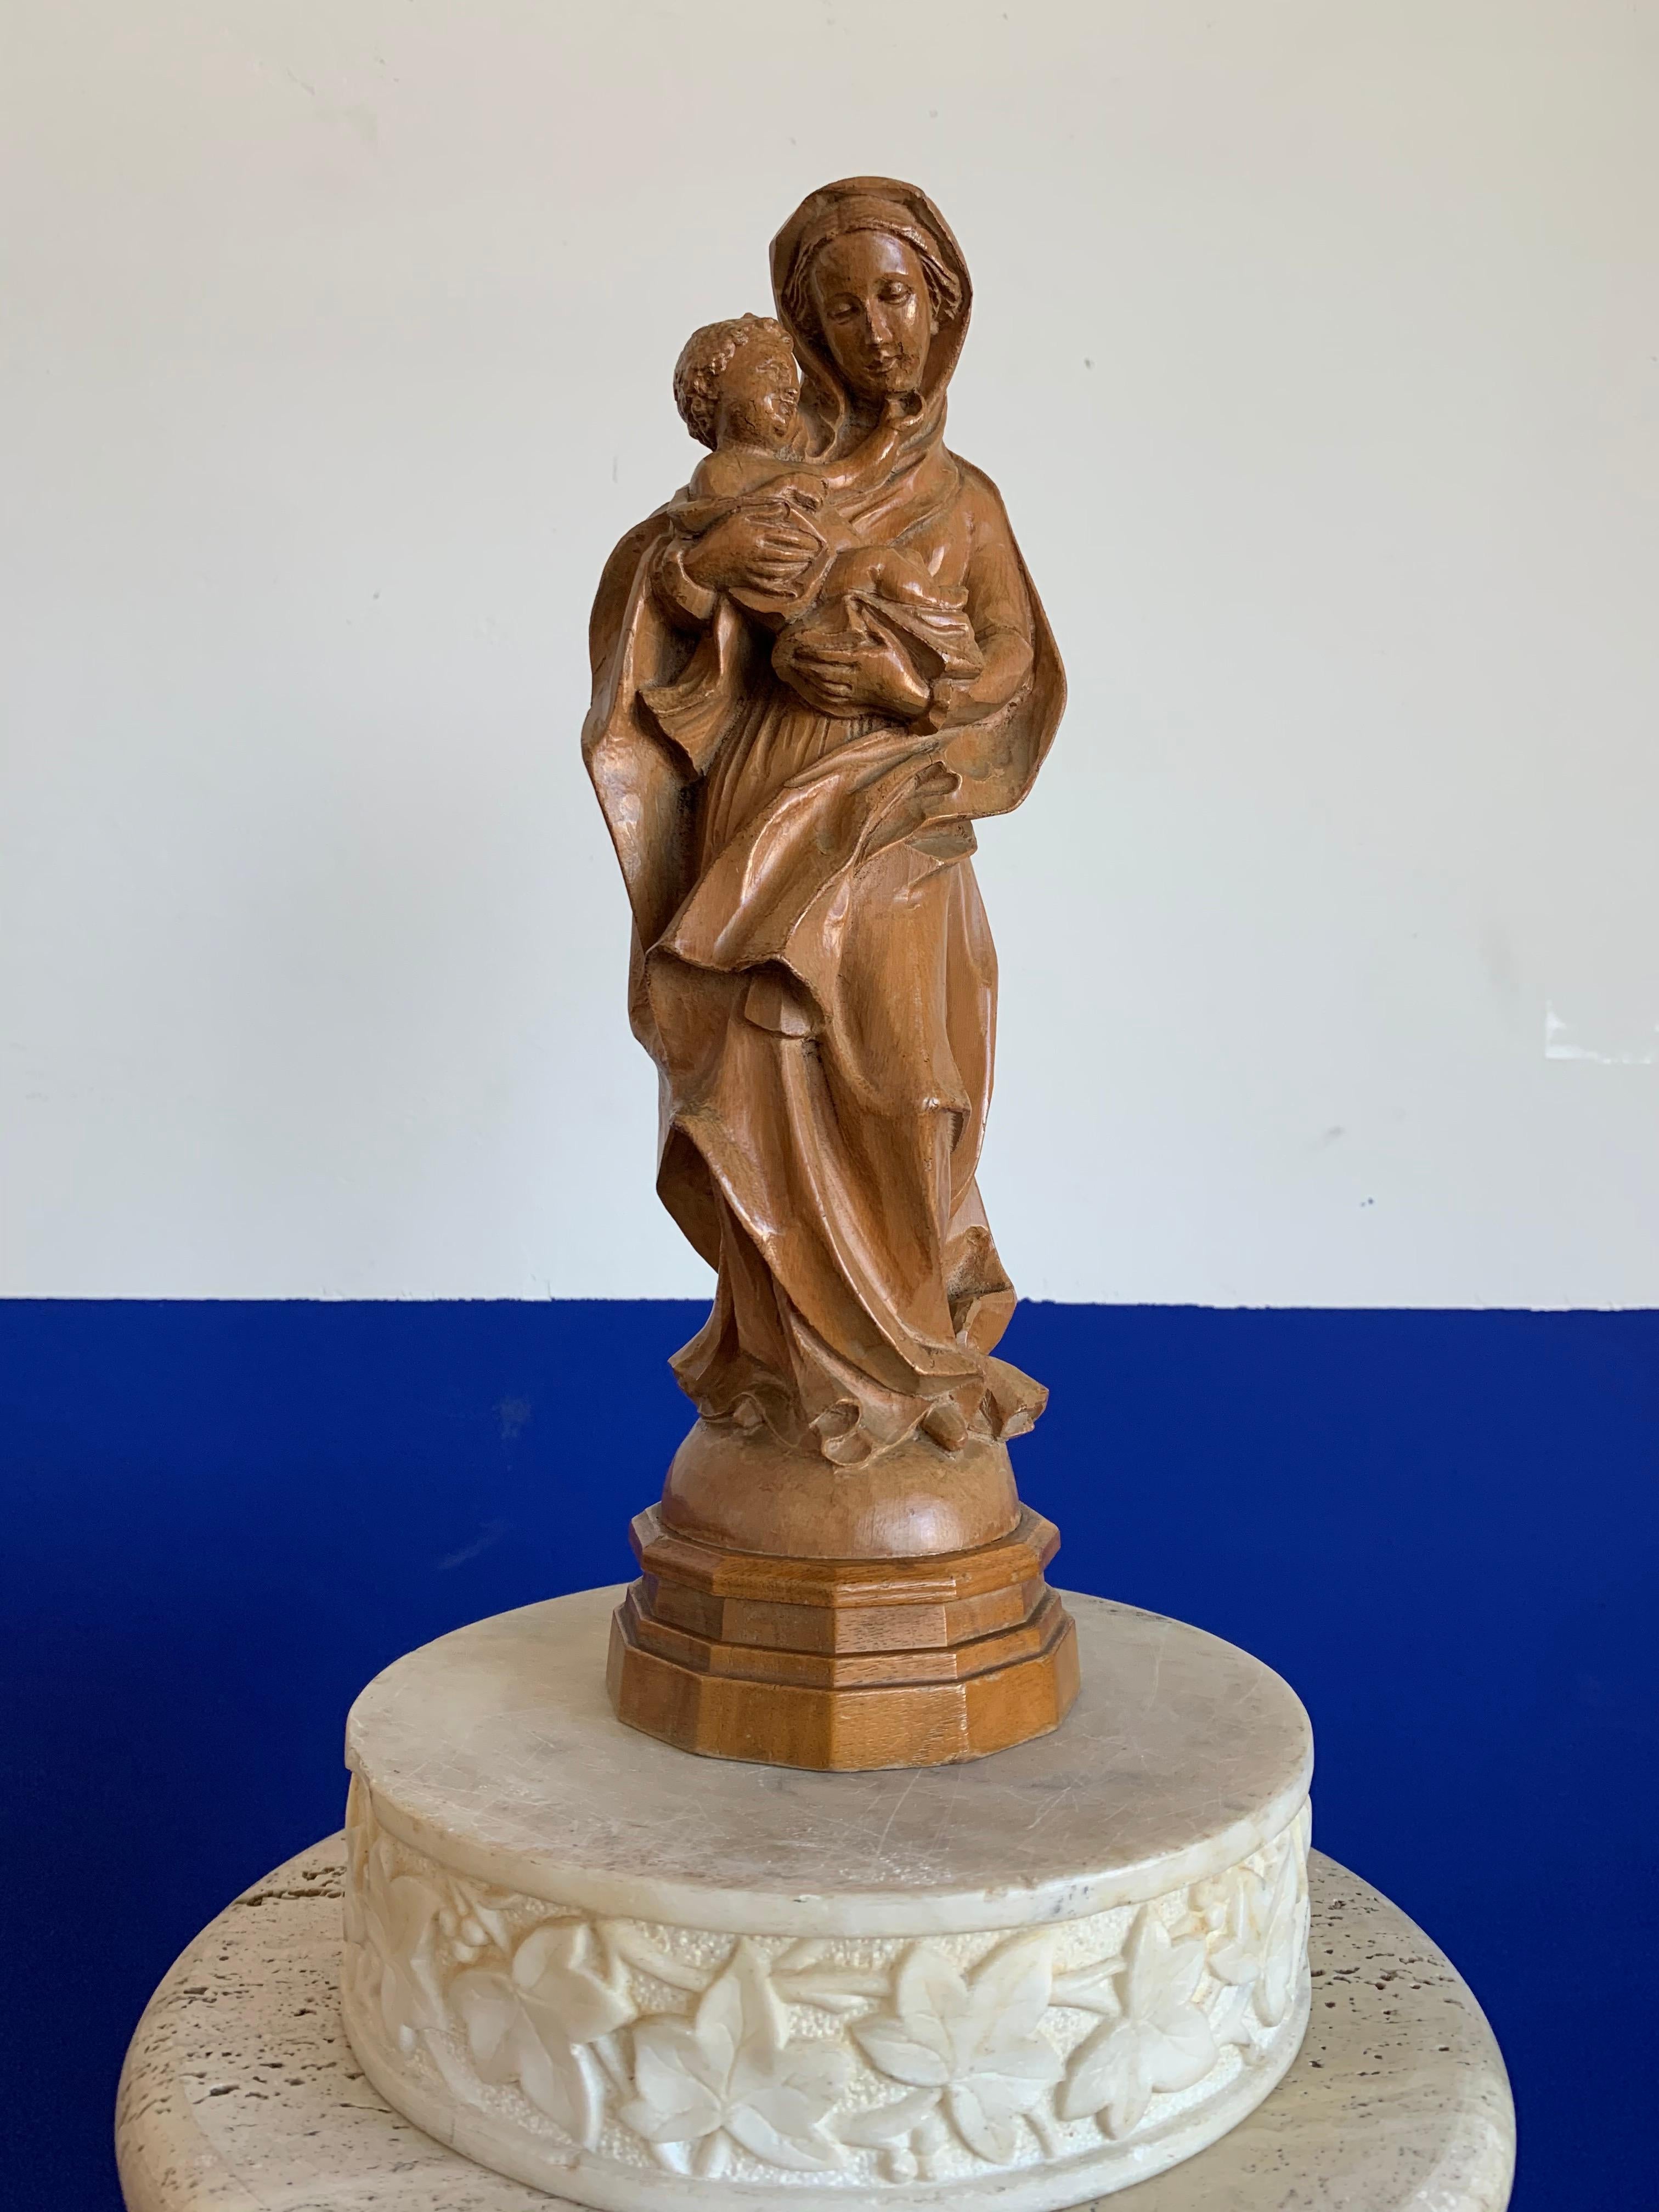 Hand-Carved Finest Quality Carved, Baroque Style Statuette of Holy Mary Holding Baby Jesus